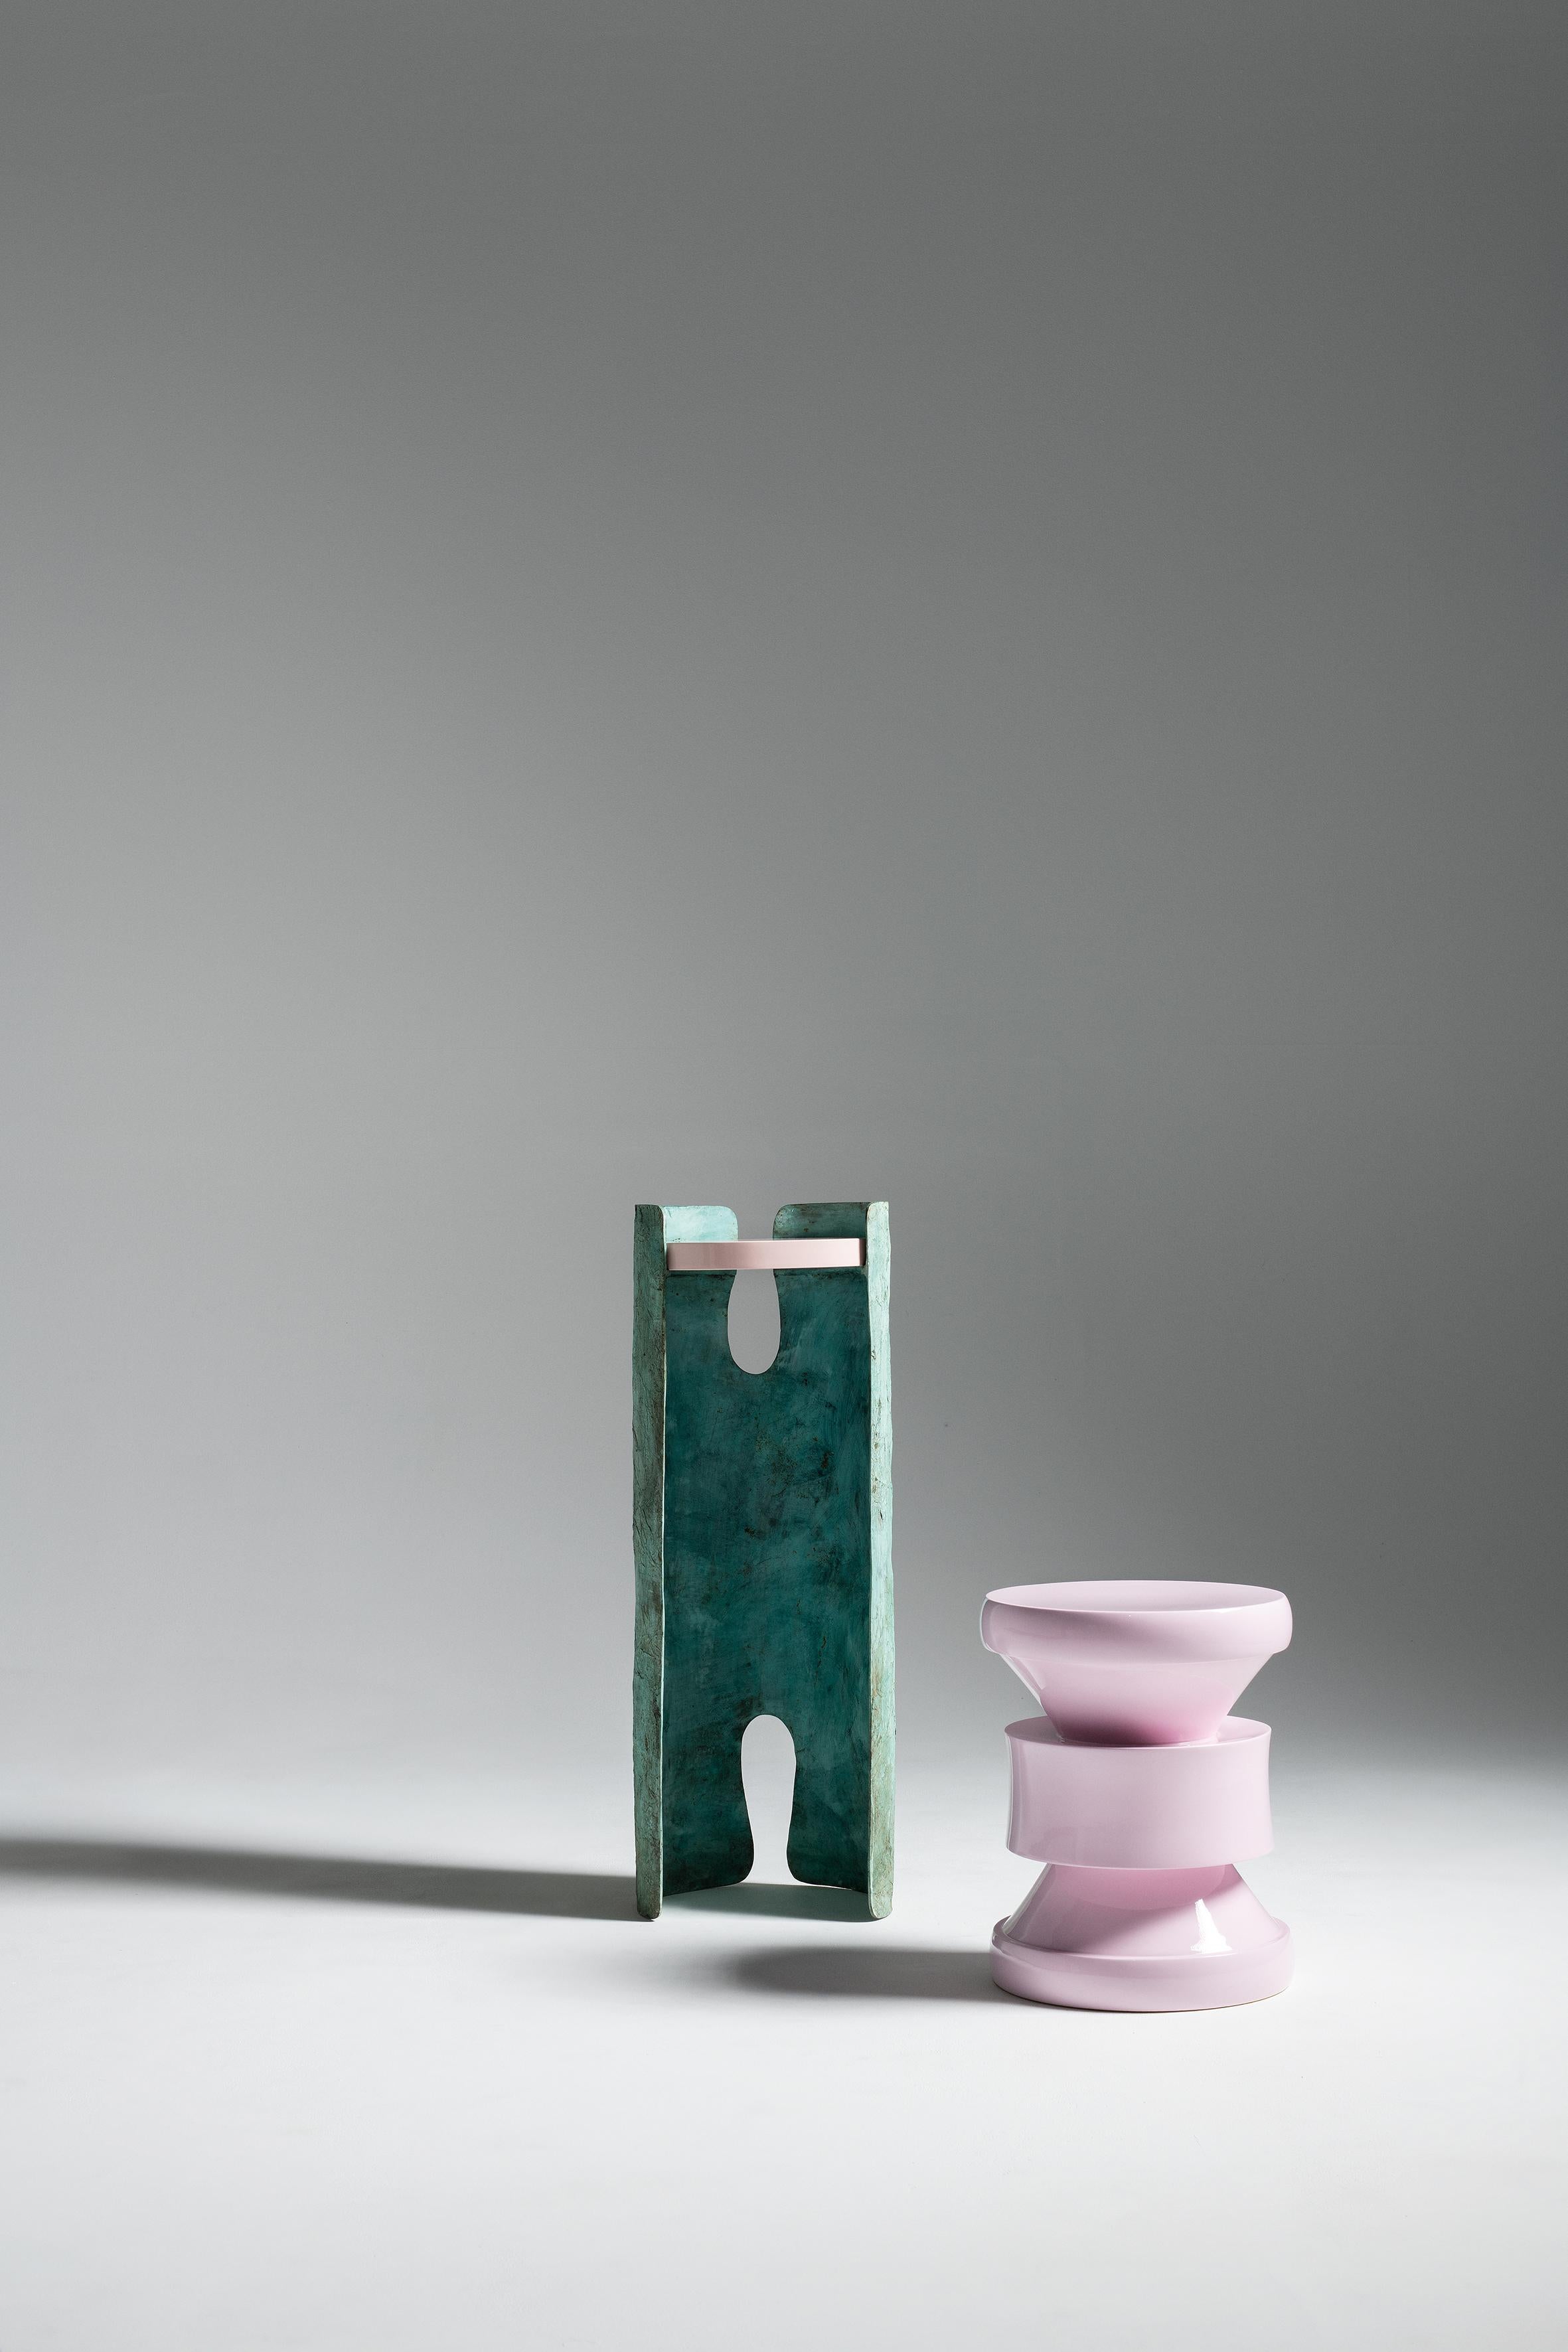 Memphis, France, Le Berre Vevaud
Empreinte Collection
Verdigris bronze leg
Bronze tray, also available in glossy lacquered wood

For their second collection, Raphaël Le Berre and Thomas Vevaud highlight the 